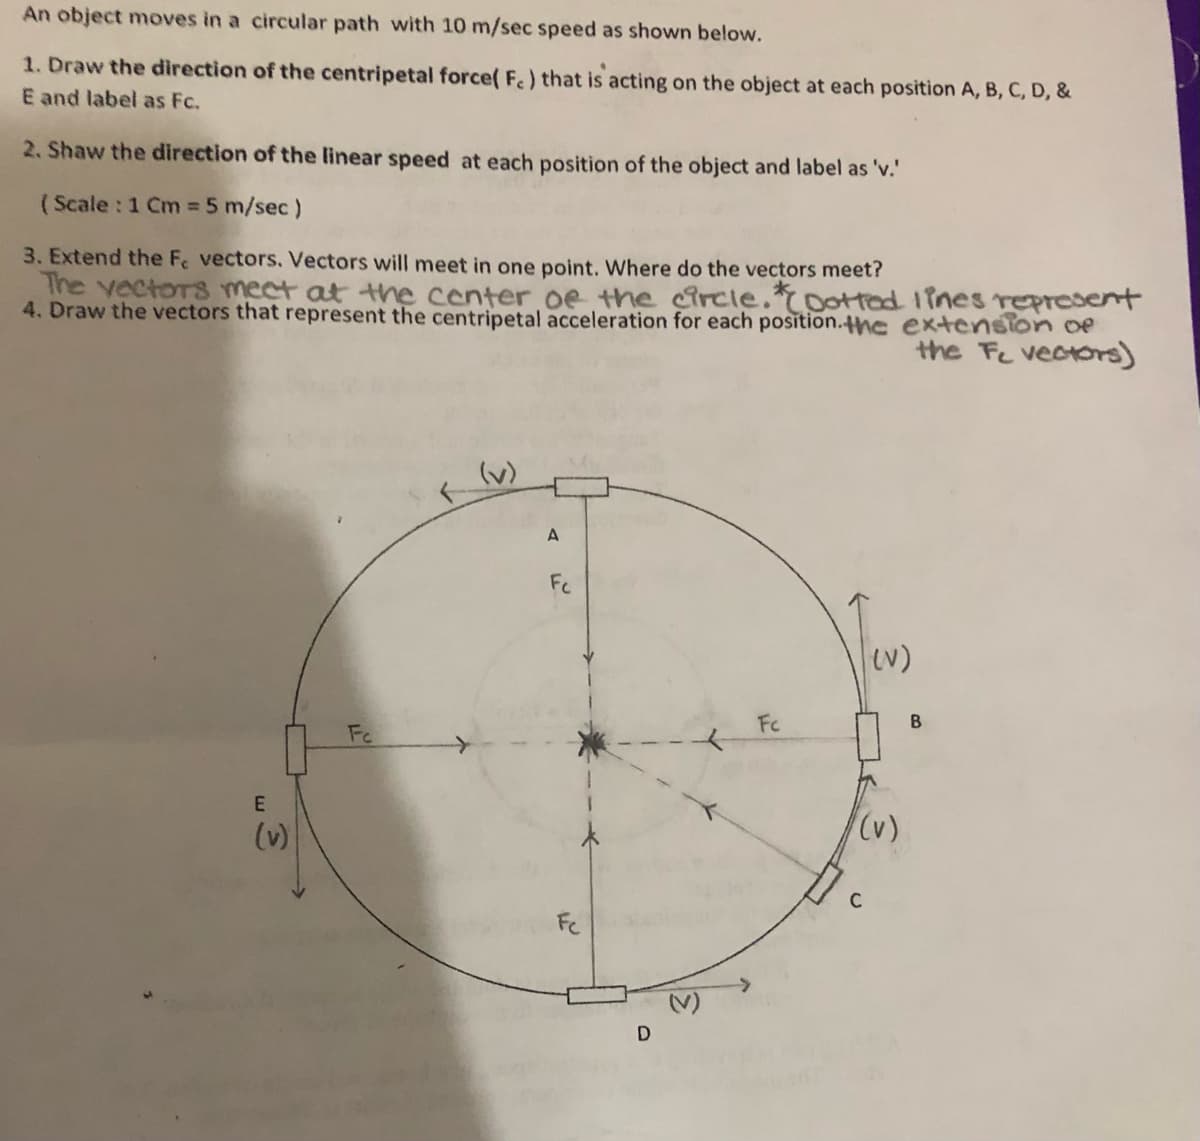 An object moves in a circular path with 10 m/sec speed as shown below.
1. Draw the direction of the centripetal force( F.) that is acting on the object at each position A, B, C, D, &
E and label as Fc.
2. Shaw the direction of the linear speed at each position of the object and label as 'v.'
(Scale : 1 Cm = 5 m/sec)
3. Extend the Fe vectors. Vectors will meet in one point. Where do the vectors meet?
The vectors mect at the center oe the circle.toottad 1ines represent
4. Draw the vectors that represent the centripetal acceleration for each position.the extension oe
the Fe vectors)
(v)
Fc
N)
Fc
Fe
(v)
(v)
C
Fe
D
